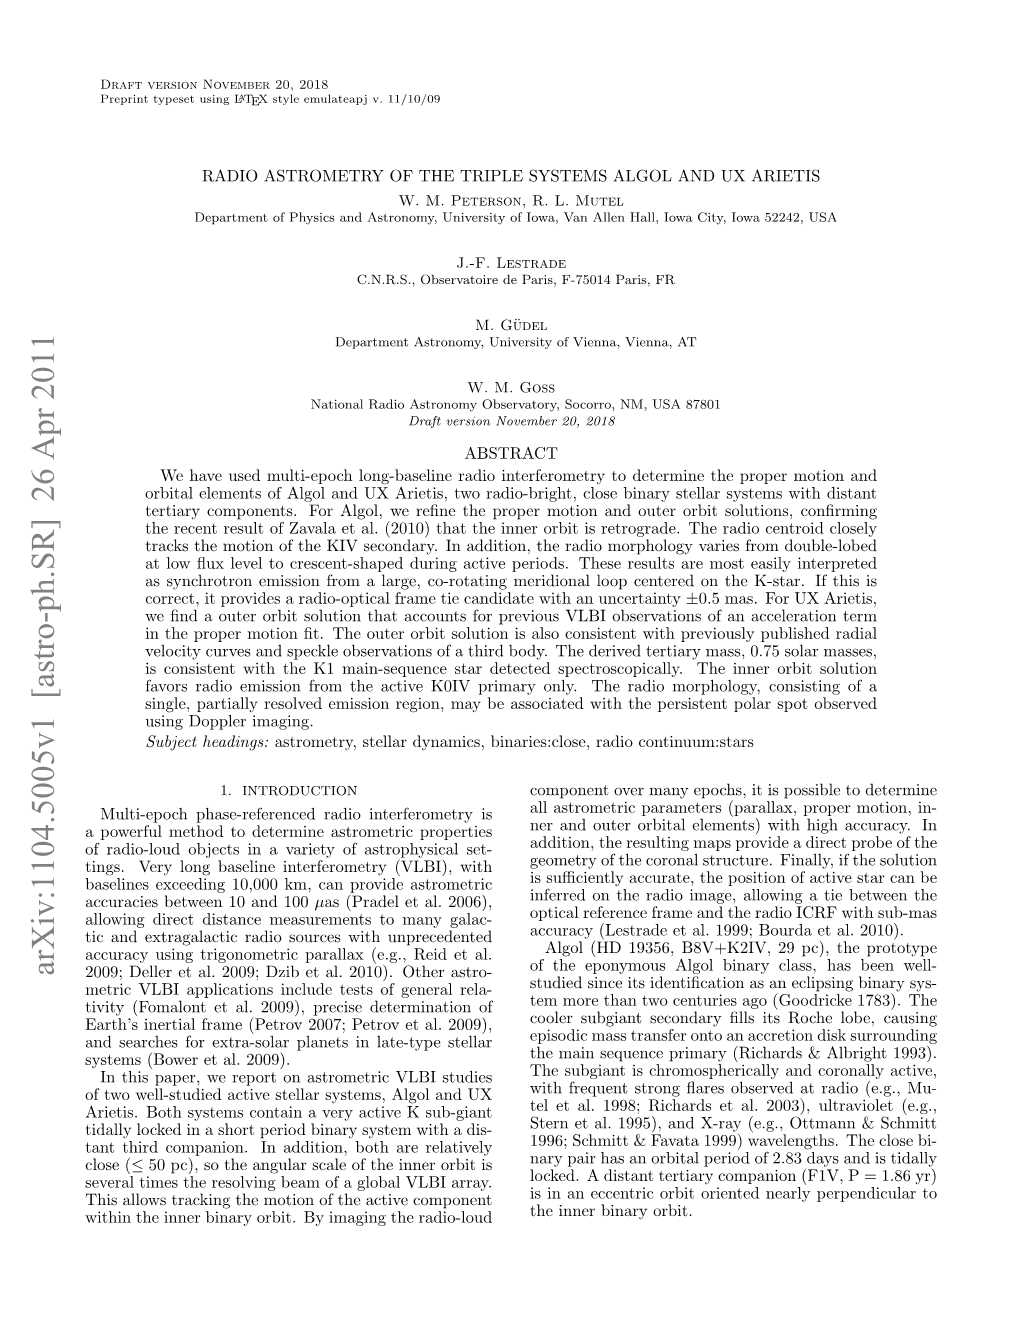 Radio Astrometry of the Triple Systems Algol and Ux Arietis W